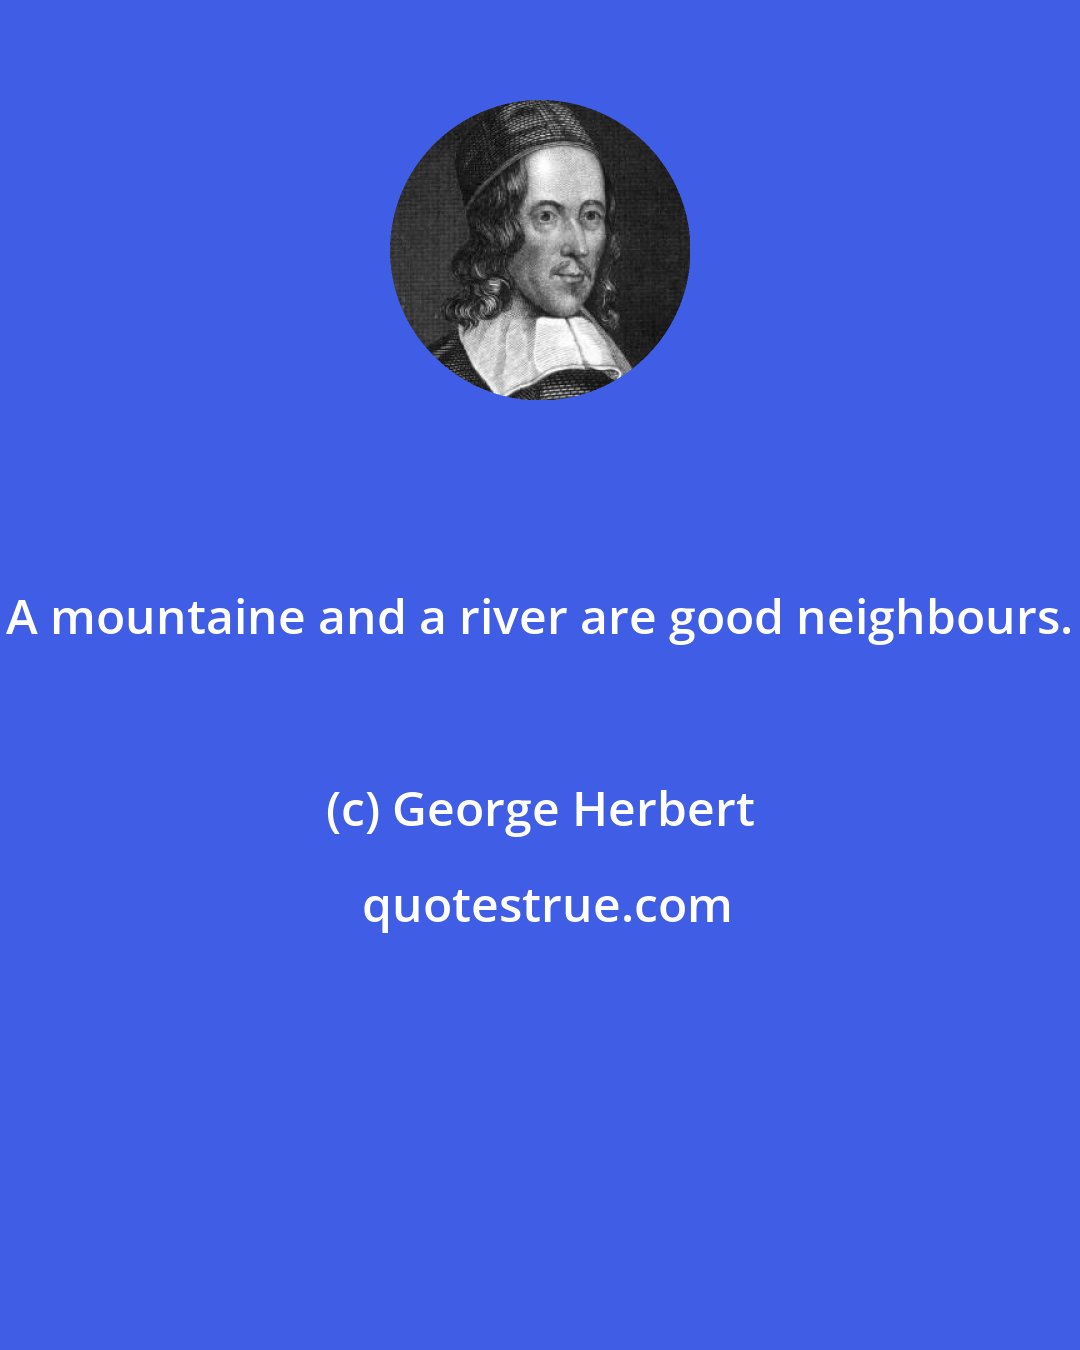 George Herbert: A mountaine and a river are good neighbours.